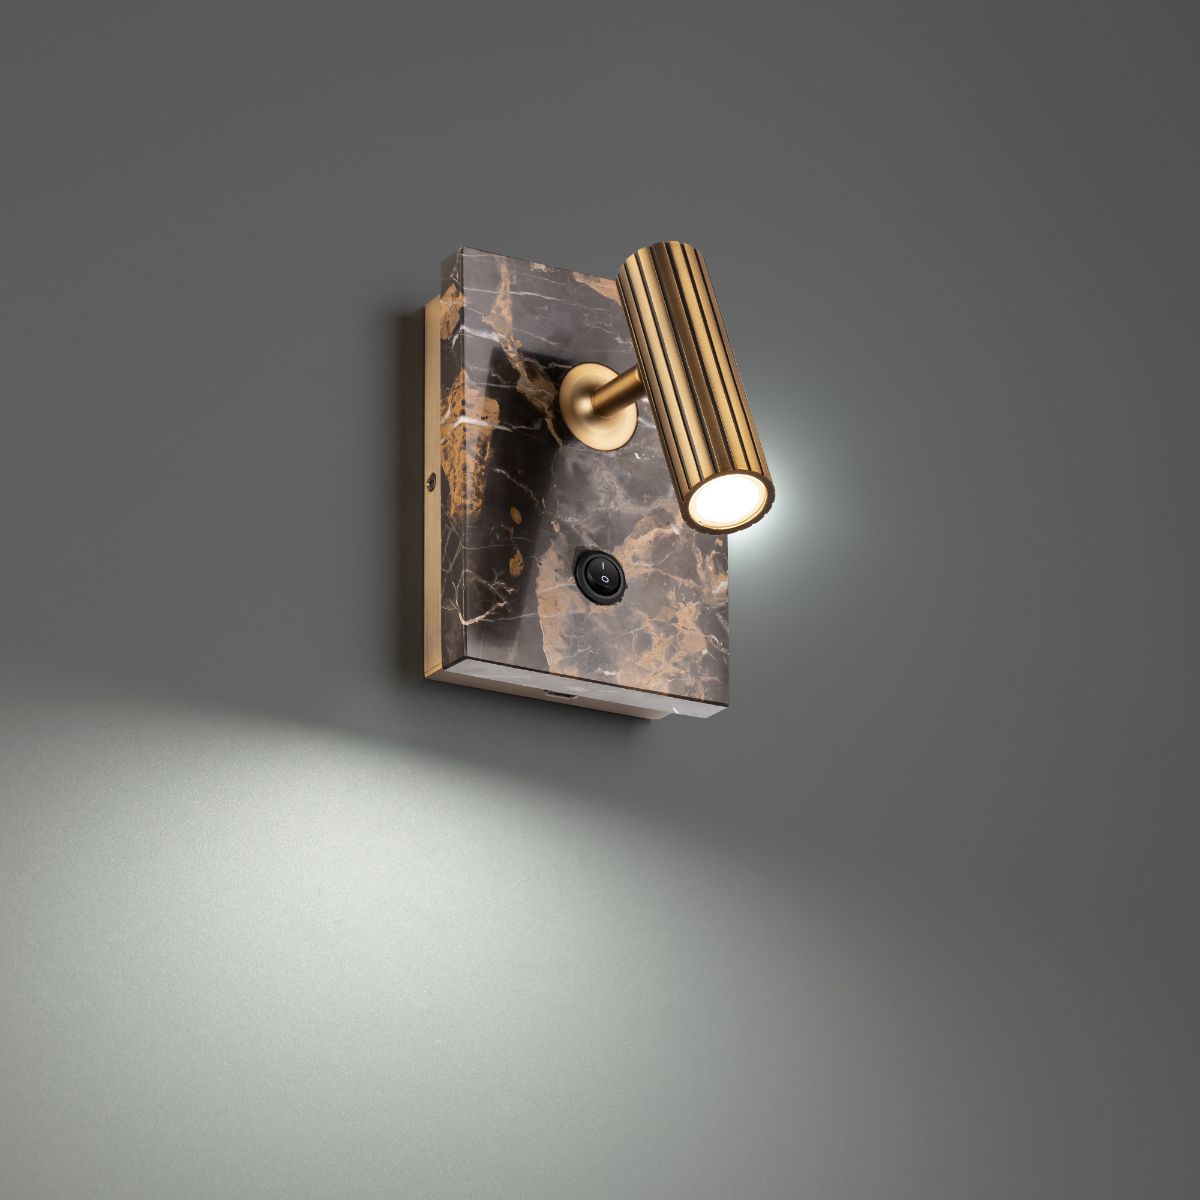 Nexus 7 in. LED Wall Sconce Black & Brass finish